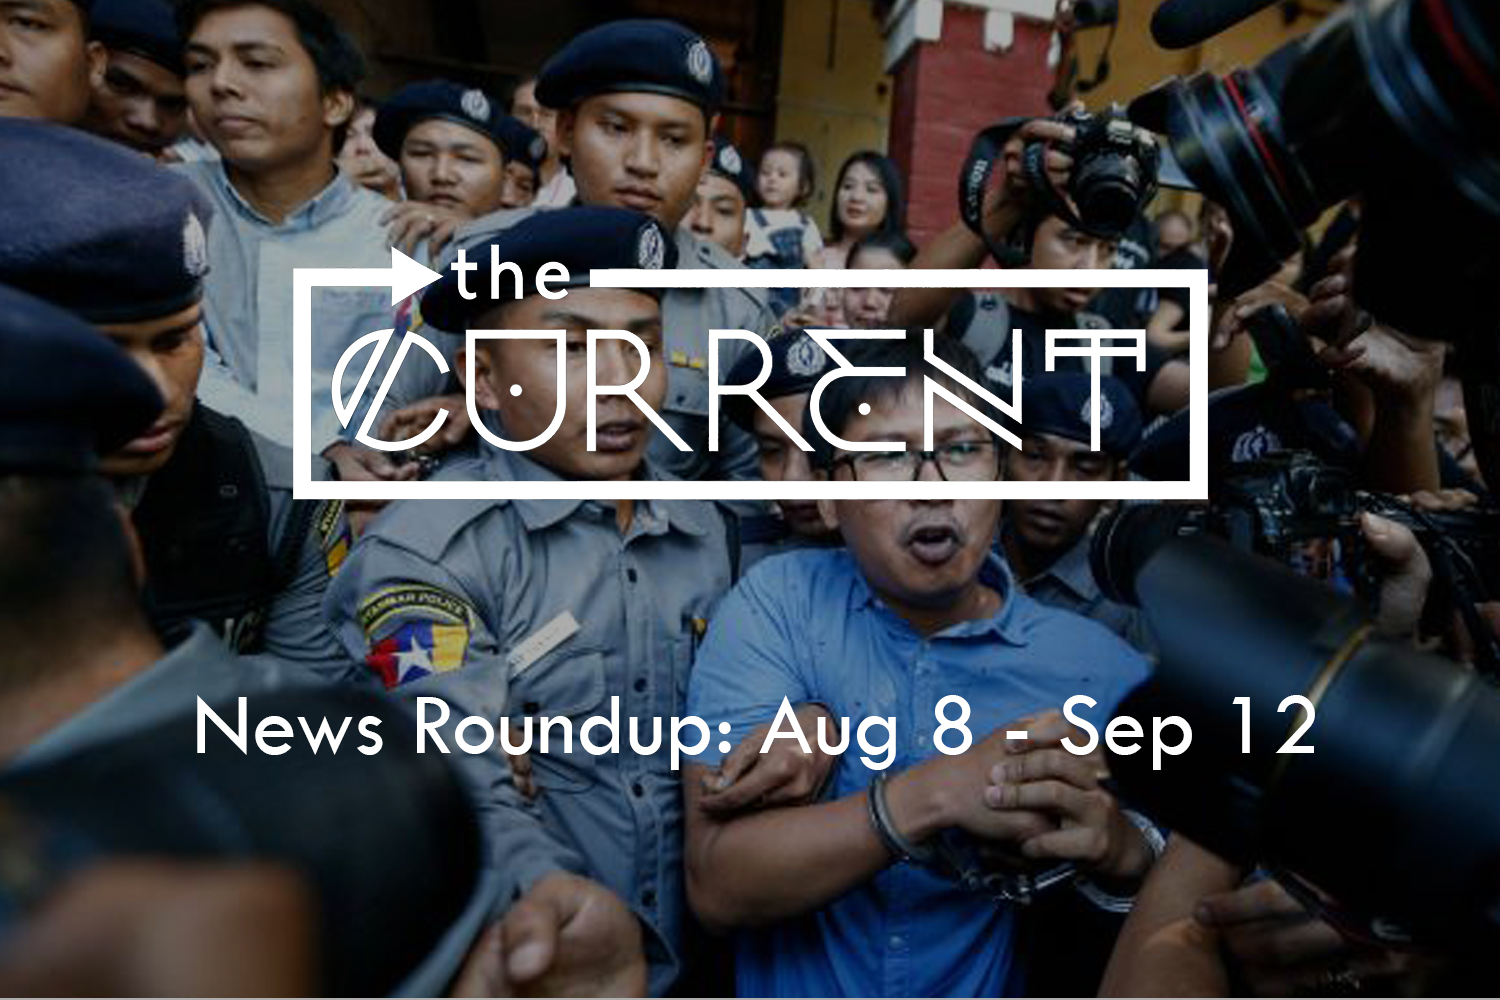 GRAPHIC: News round up for August 2018. Graphic created by The Signal Reporter Trey Blakely and Online Editor Alyssa Shotwell.